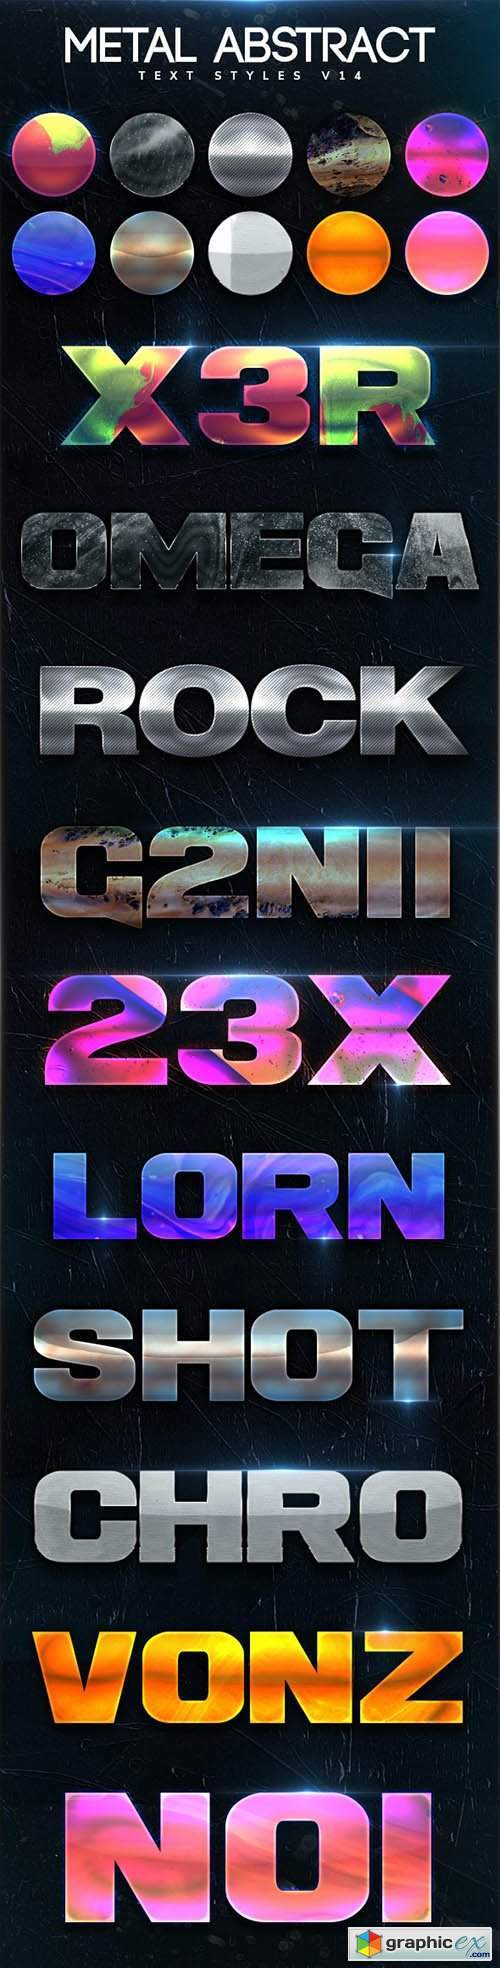 Metal Abstract Text Styles V14